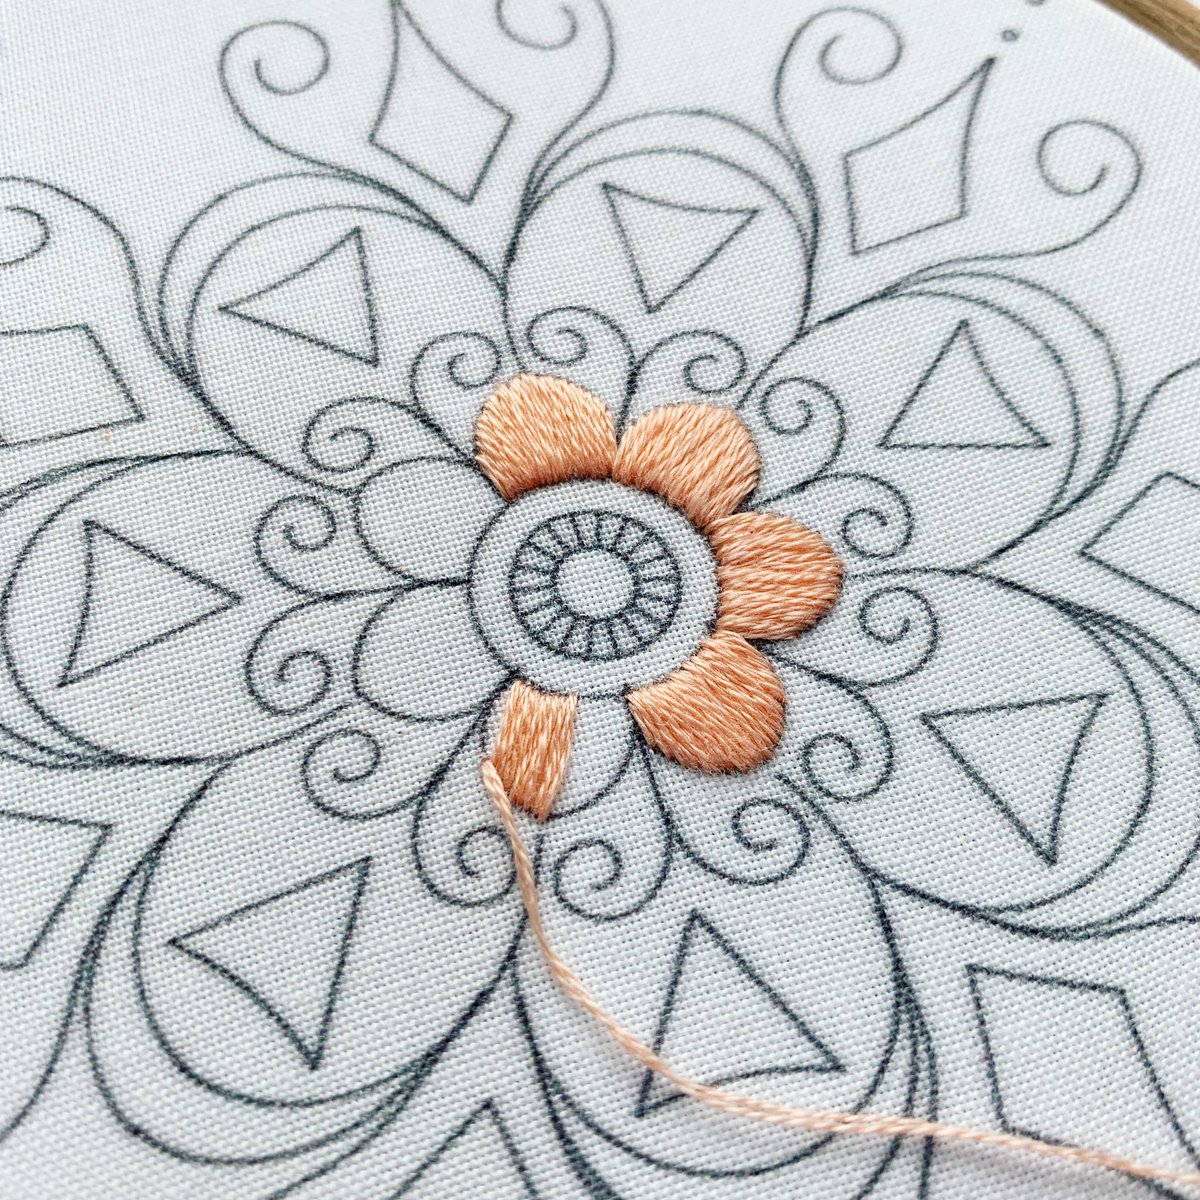 Starting the first few stitches of the Mandala…🪡🤍

#workinprogress #slowstitching #relaxing #mandalaembroidery #embroidery